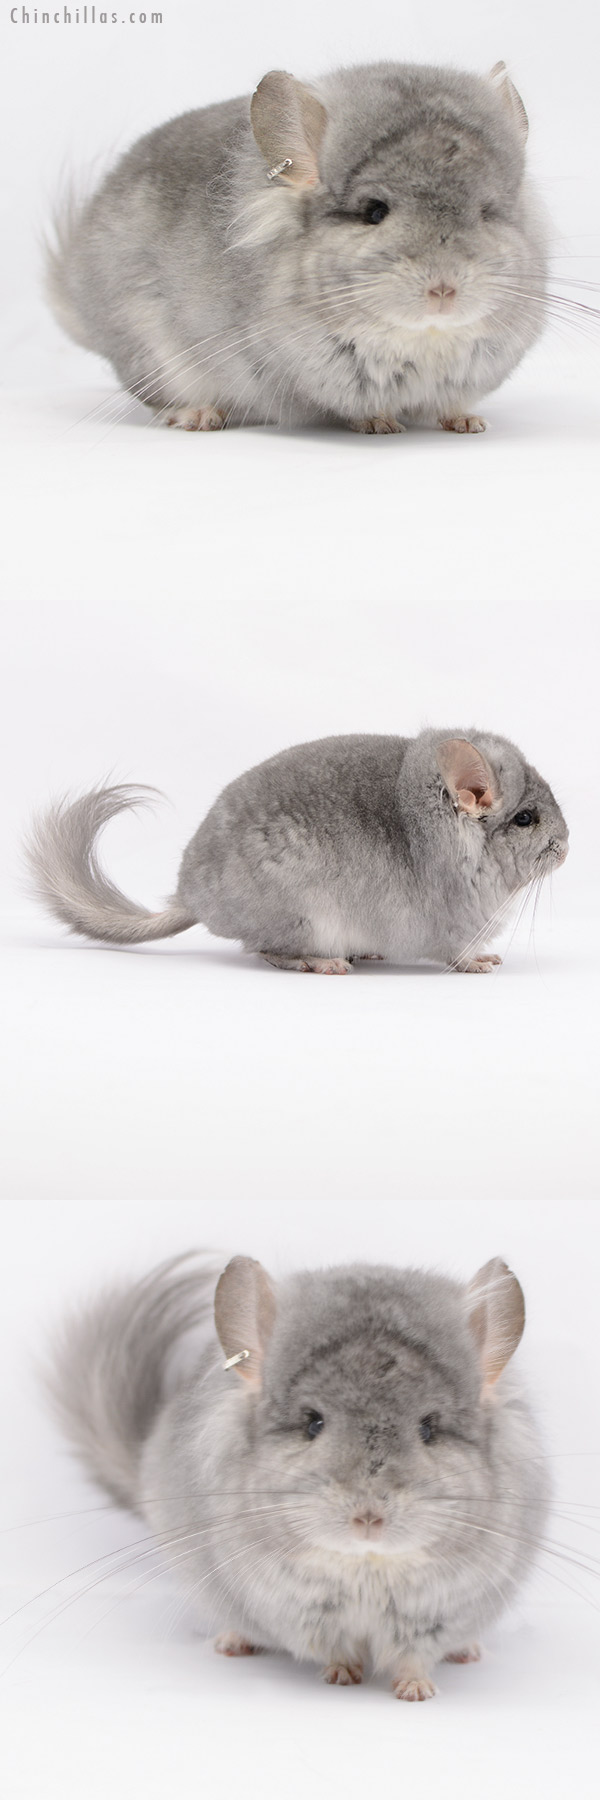 Chinchilla or related item offered for sale or export on Chinchillas.com - 20185 Exceptional Sapphire  Royal Persian Angora Male Chinchilla